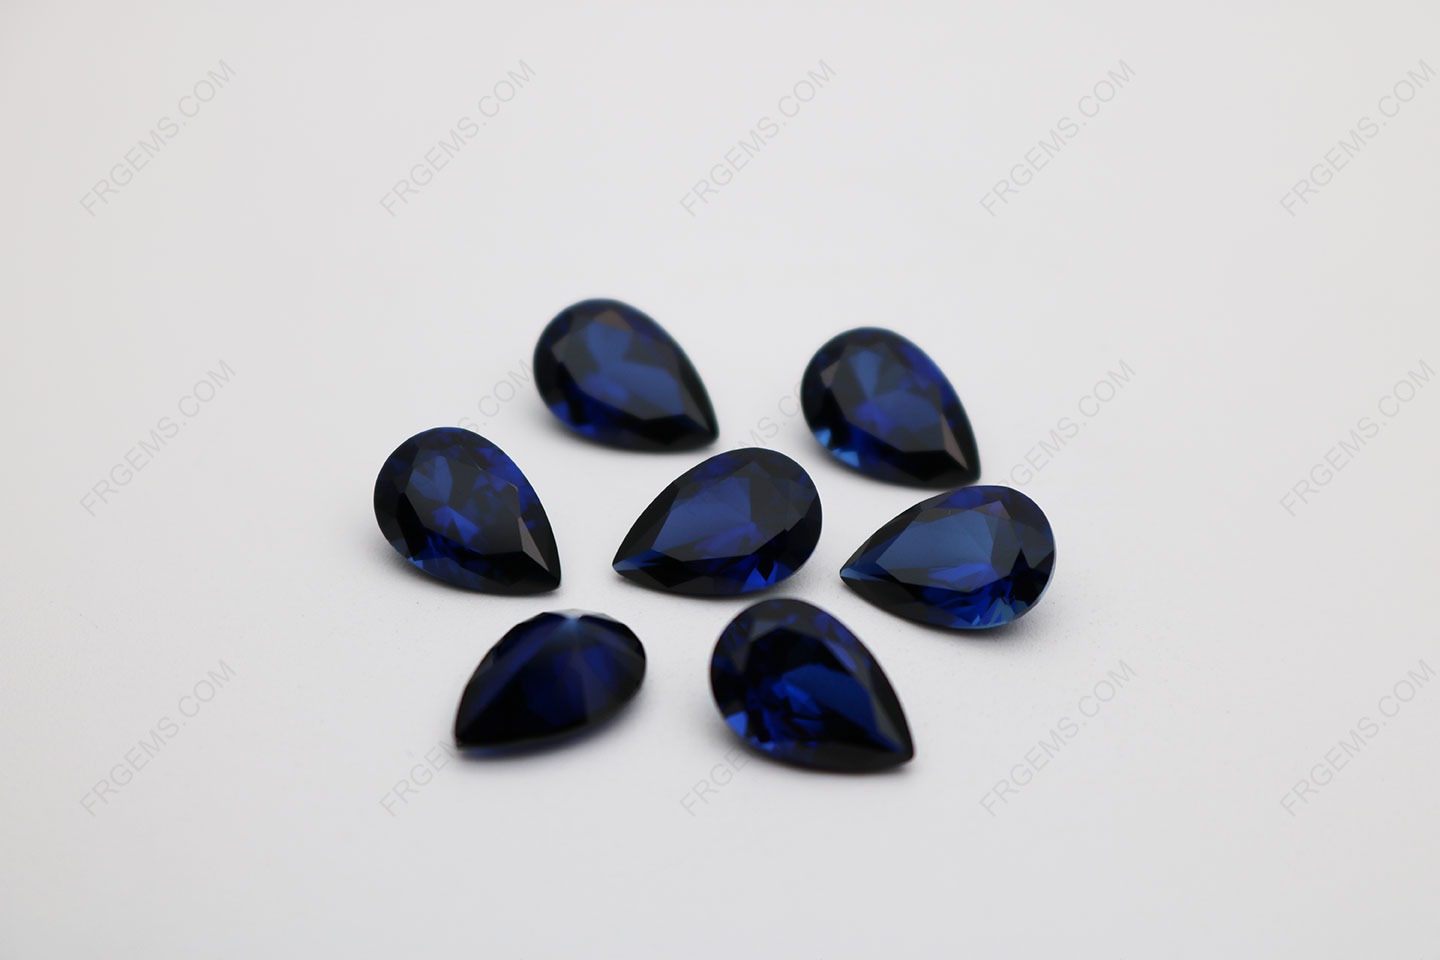 Synthetic Corundum Blue Sapphire 34# Pear Shape Faceted Cut 7x10mm stones IMG_0929